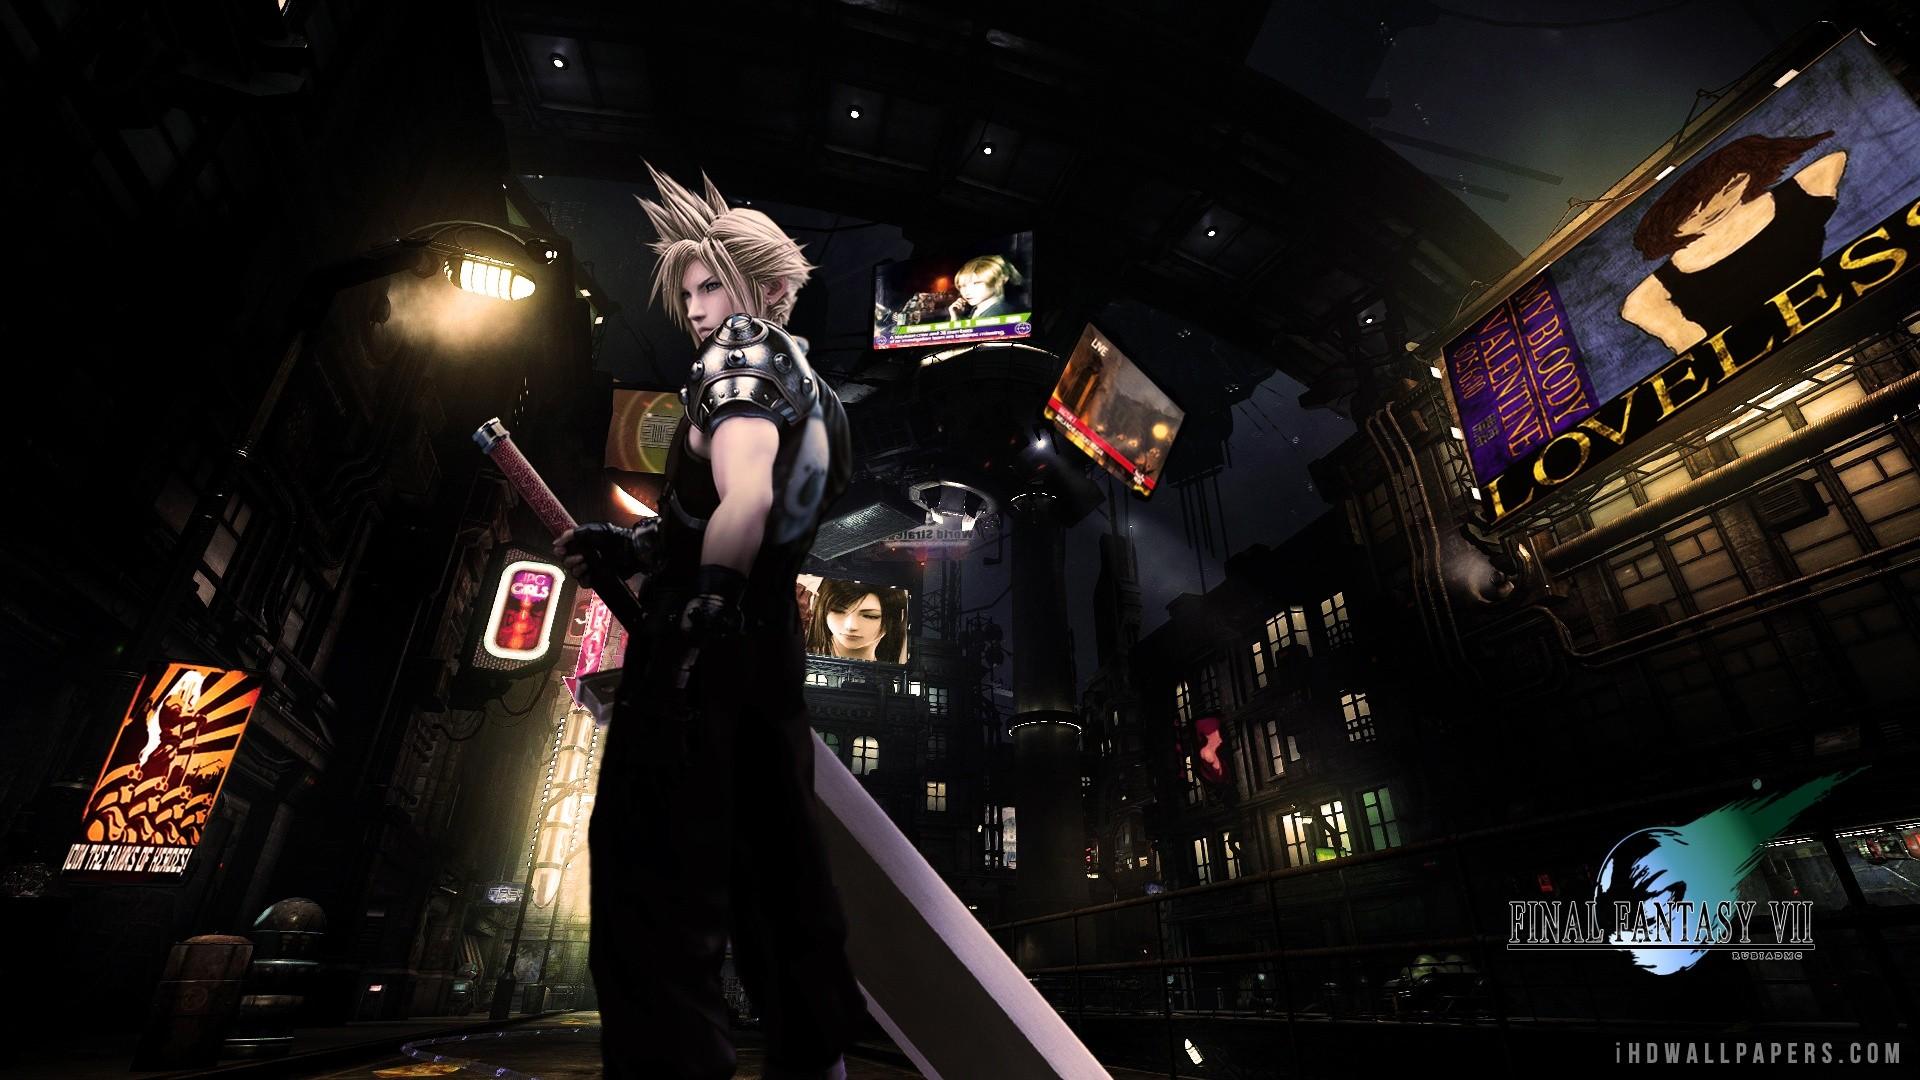 Final Fantasy VII wallpapers ·① Download free awesome full HD